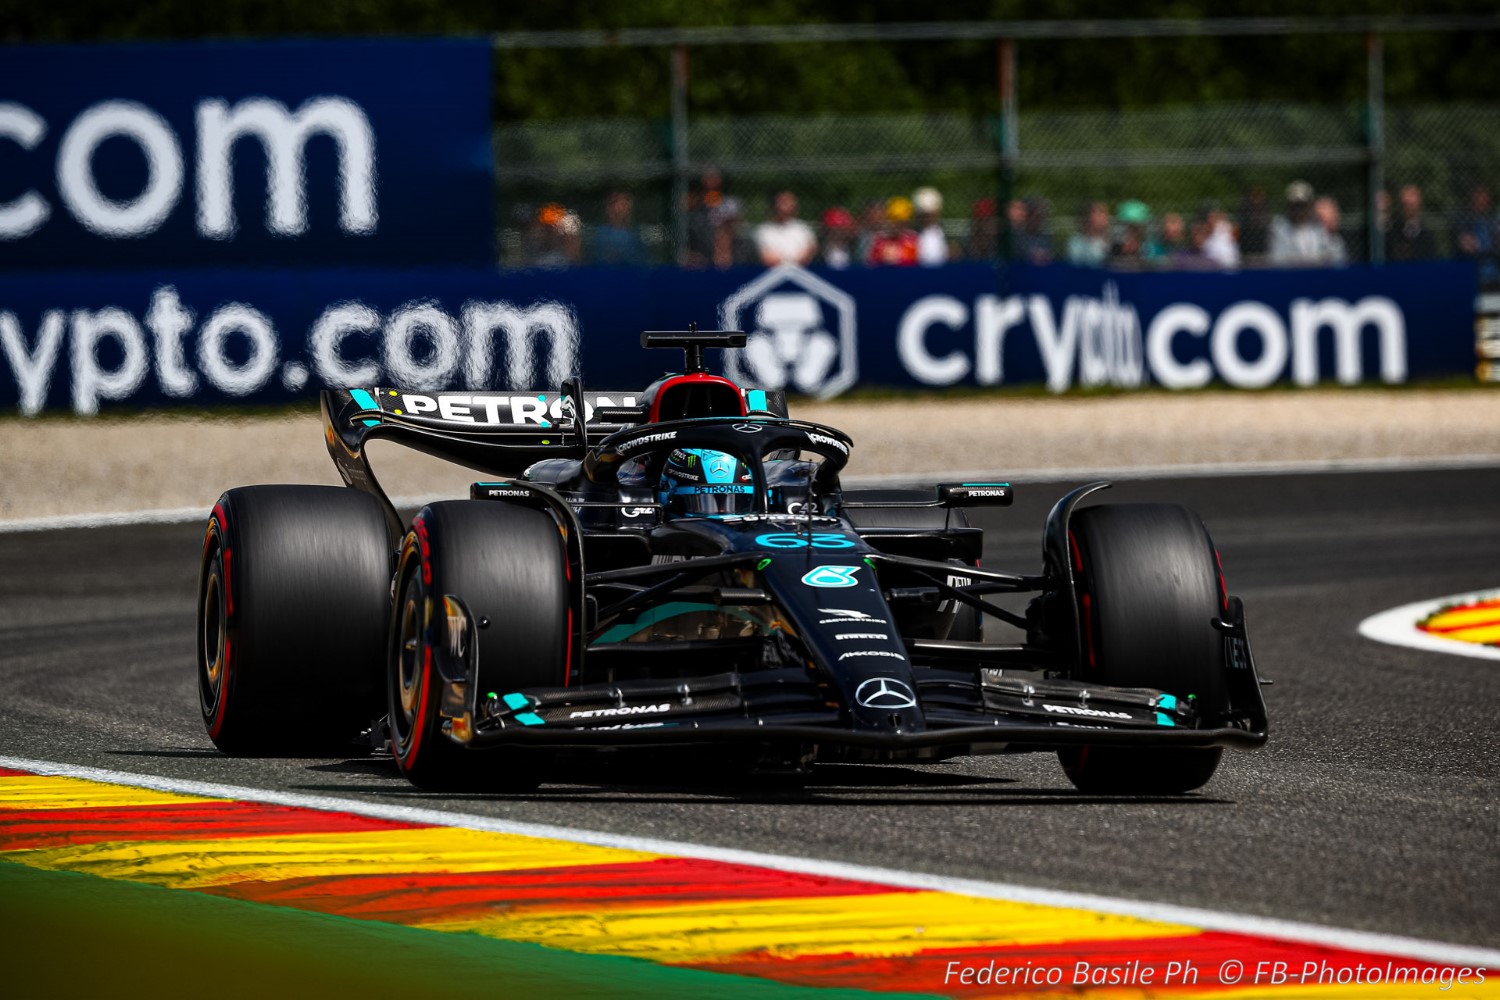 #63 George Russell, (GRB) AMG Mercedes Ineos during the Belgian GP, Spa-Francorchamps 27-30 July 2023 Formula 1 World championship 2023.